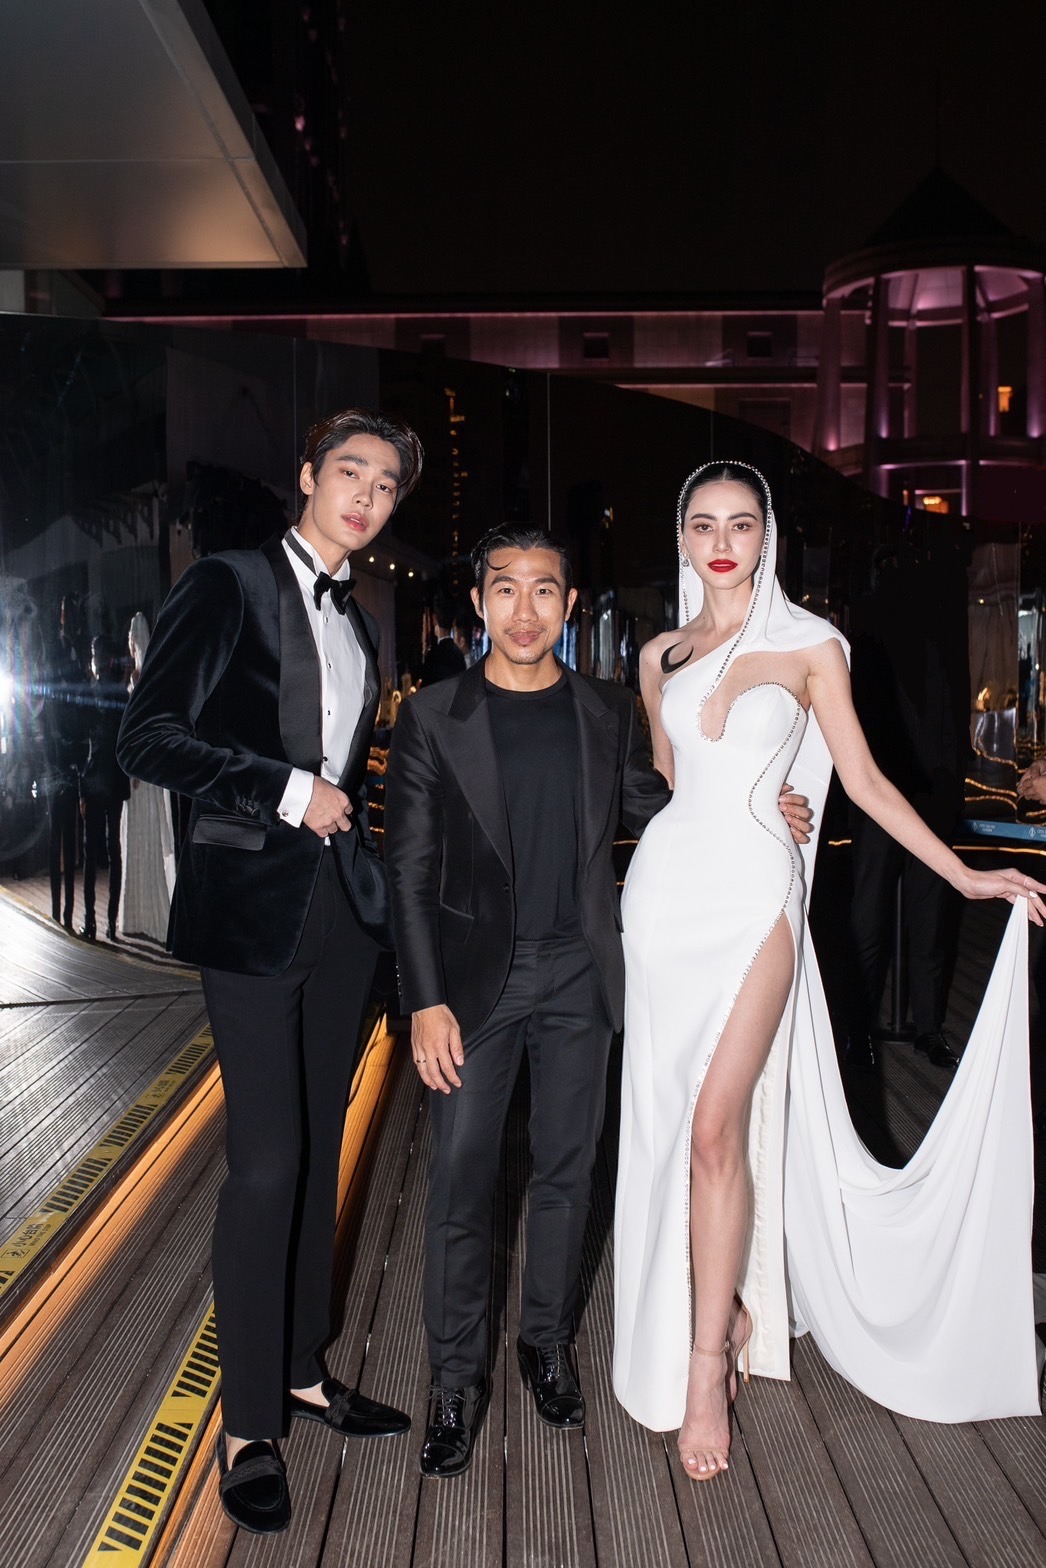 Thai fashion brand Poem unveils collection at first solo show in ...